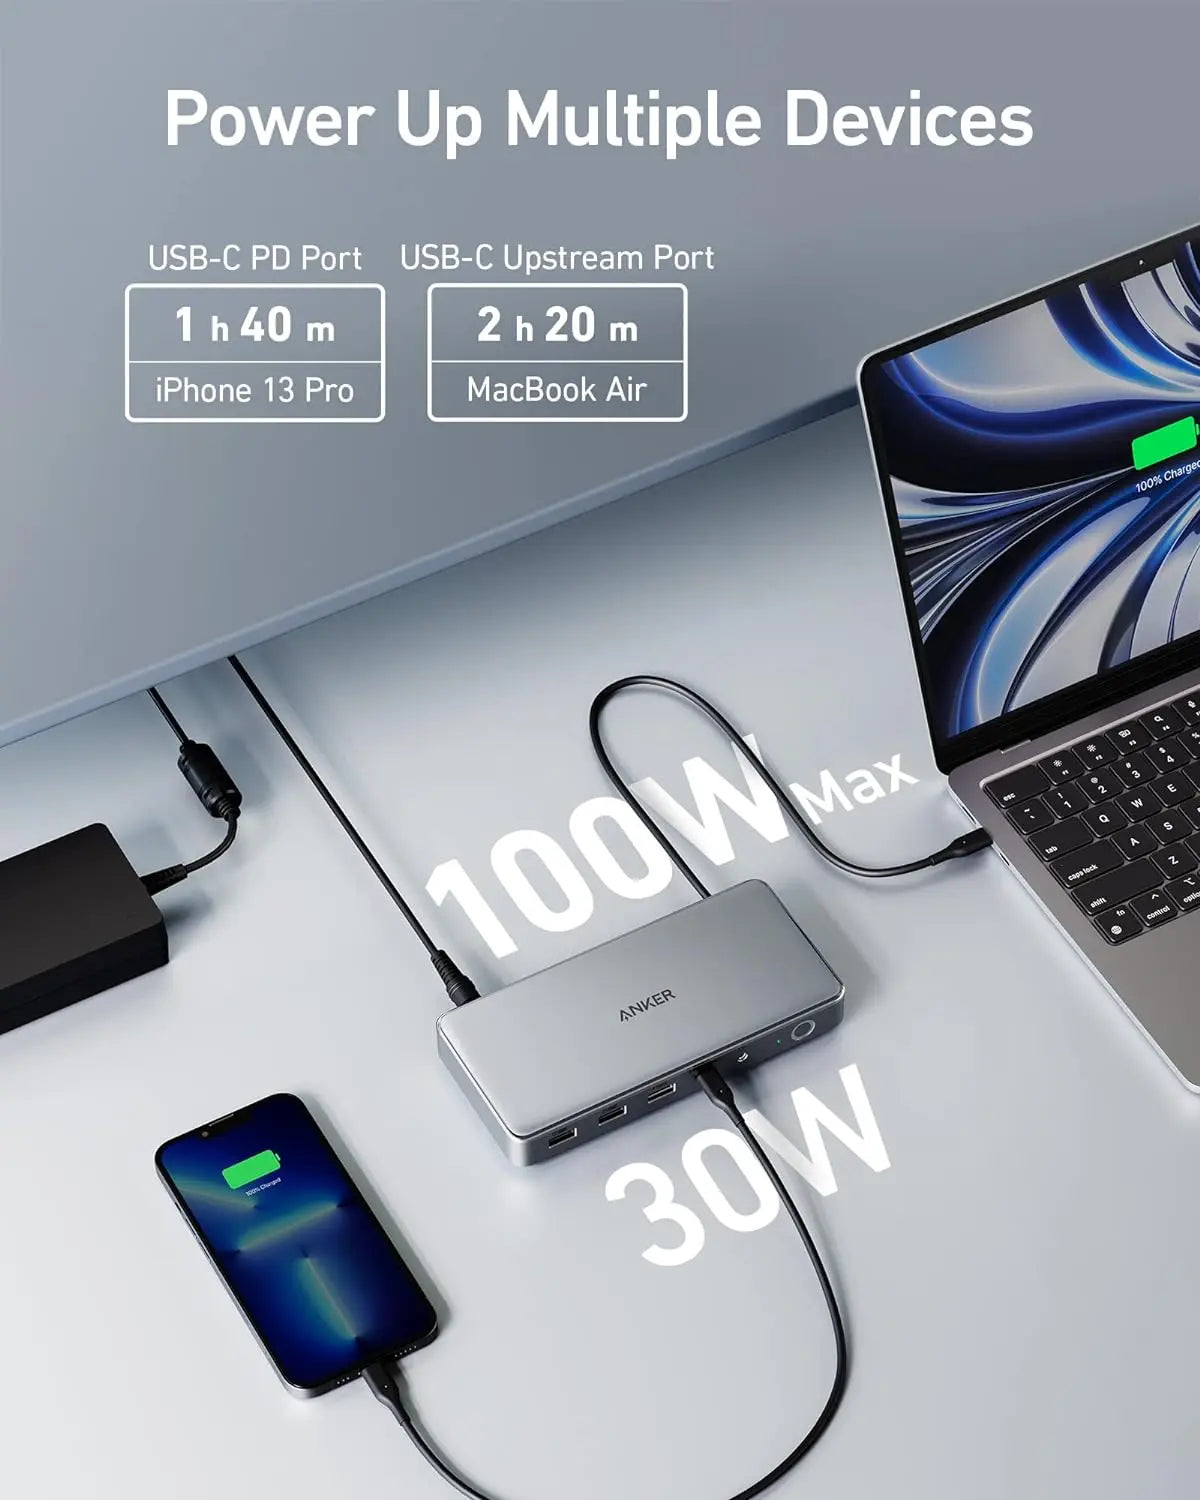 Anker 10-in-1 USB C Docking Station with Dual HDMI and DisplayPort A8395 Anker Singapore